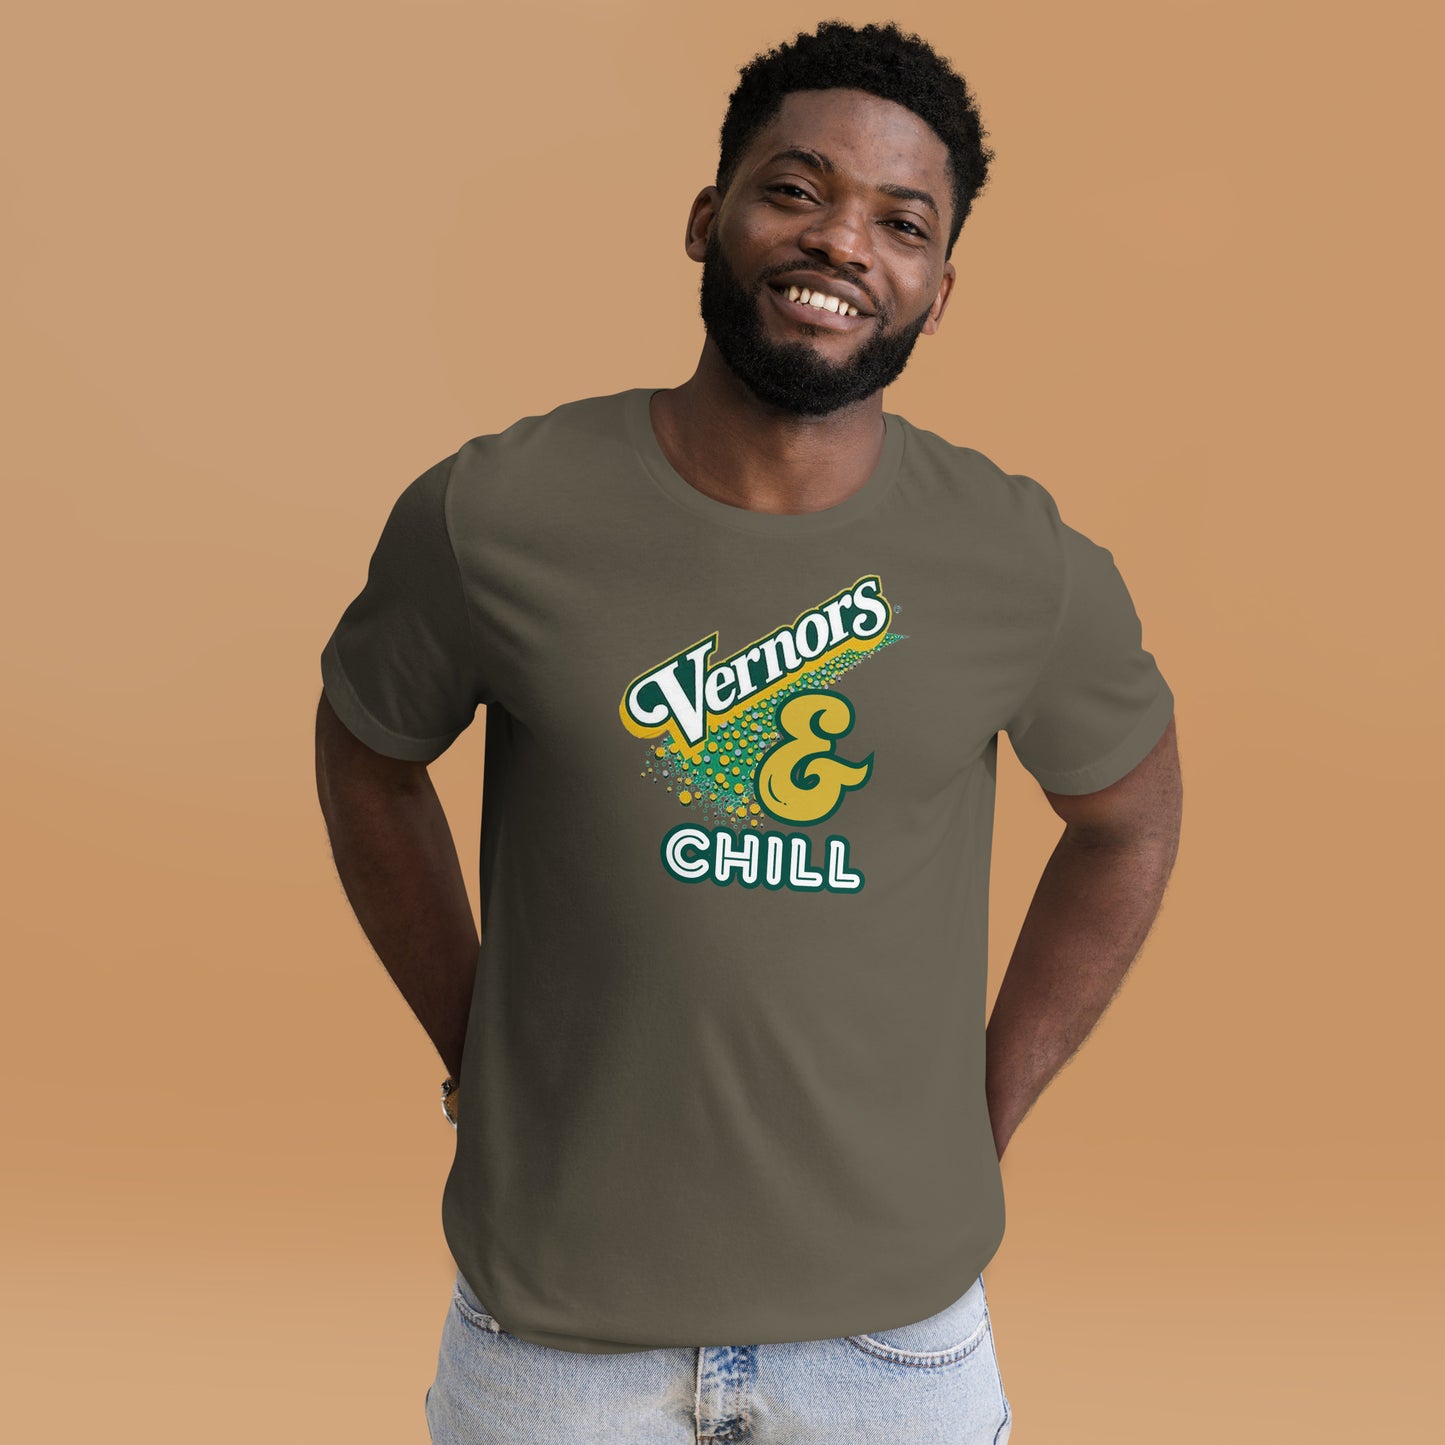 Vernors and Chill Unisex t-shirt